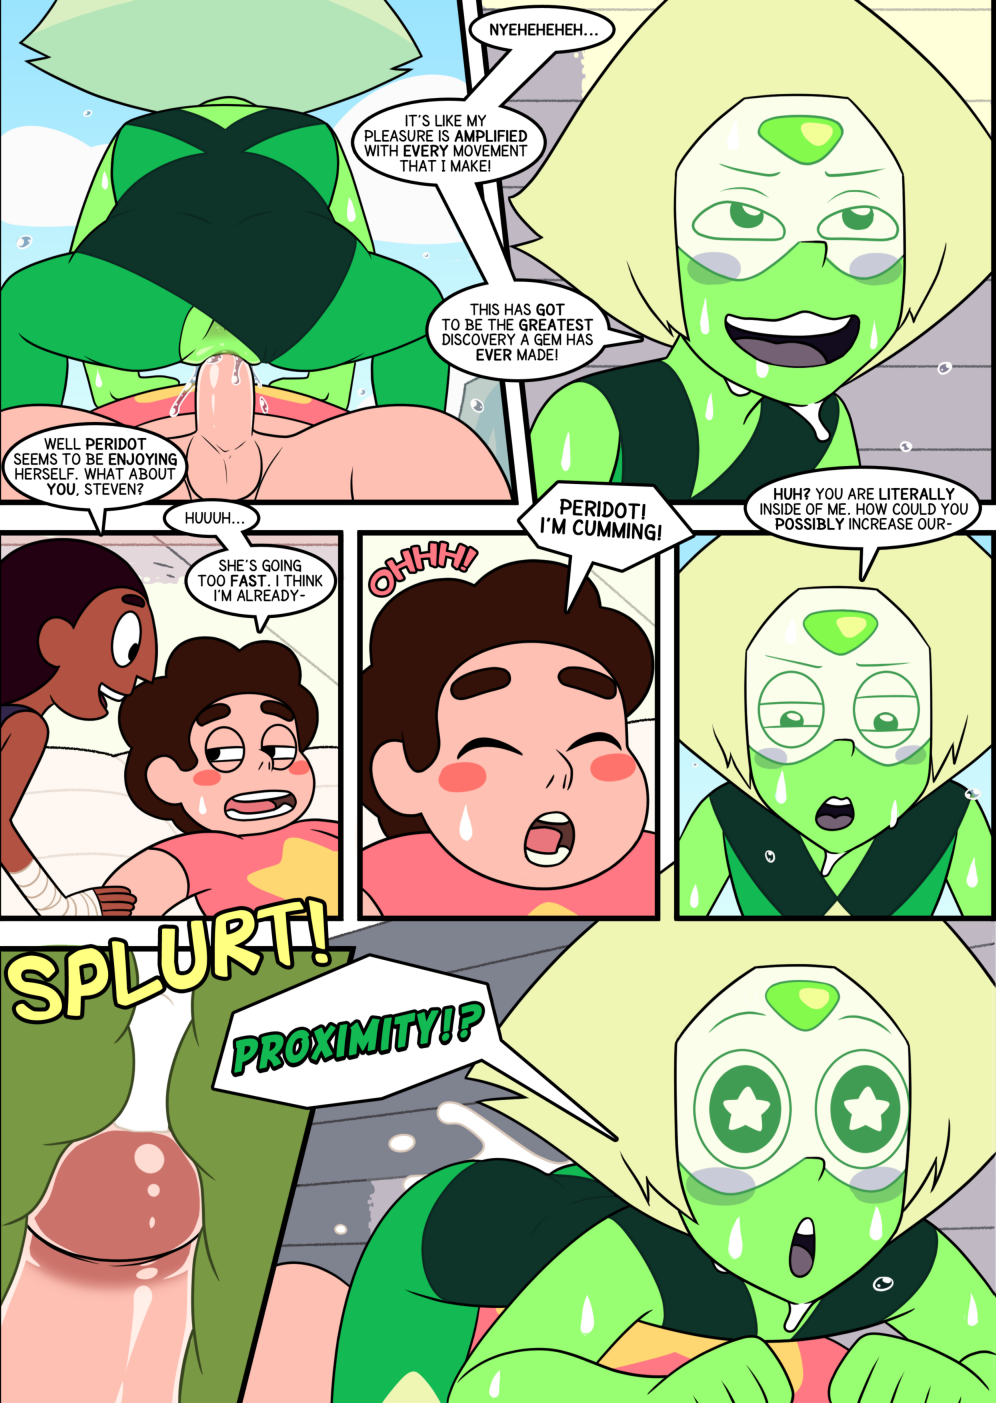 cartoon porn comic peridot steven on game cartoon or film steven universe for free and without registration